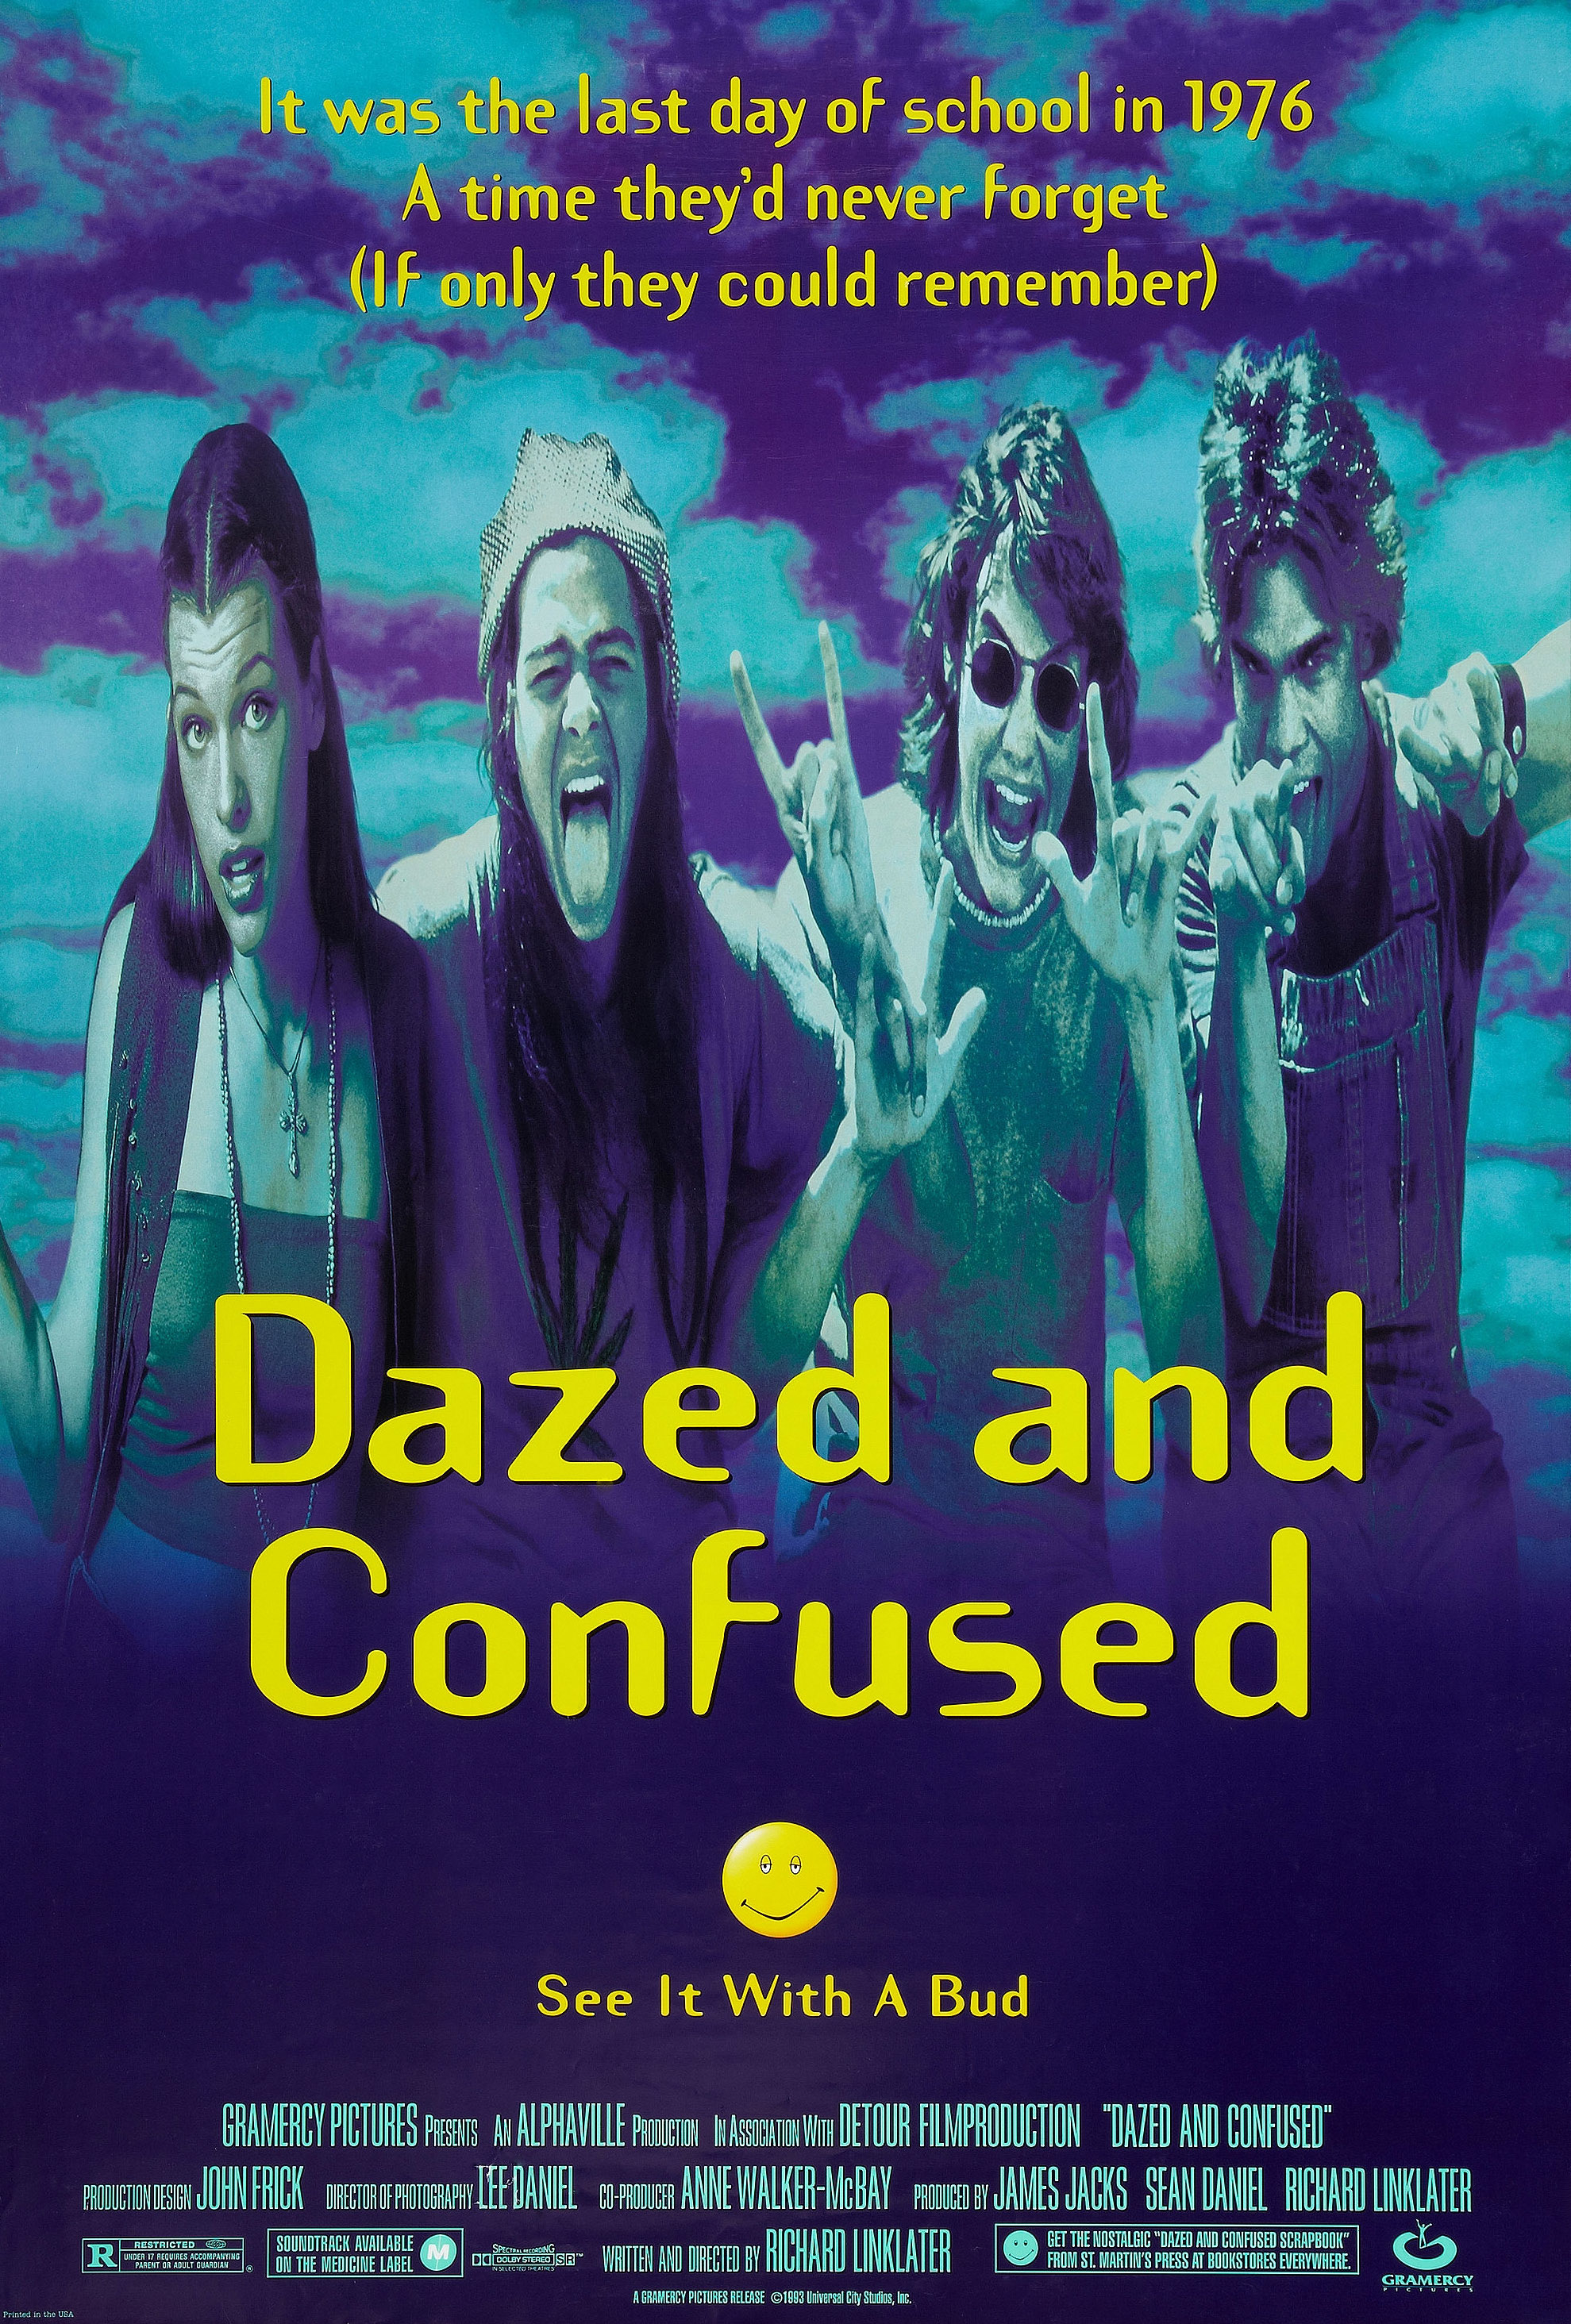 Movie poster for &quot;Dazed and Confused&quot; with four characters imitating a scream